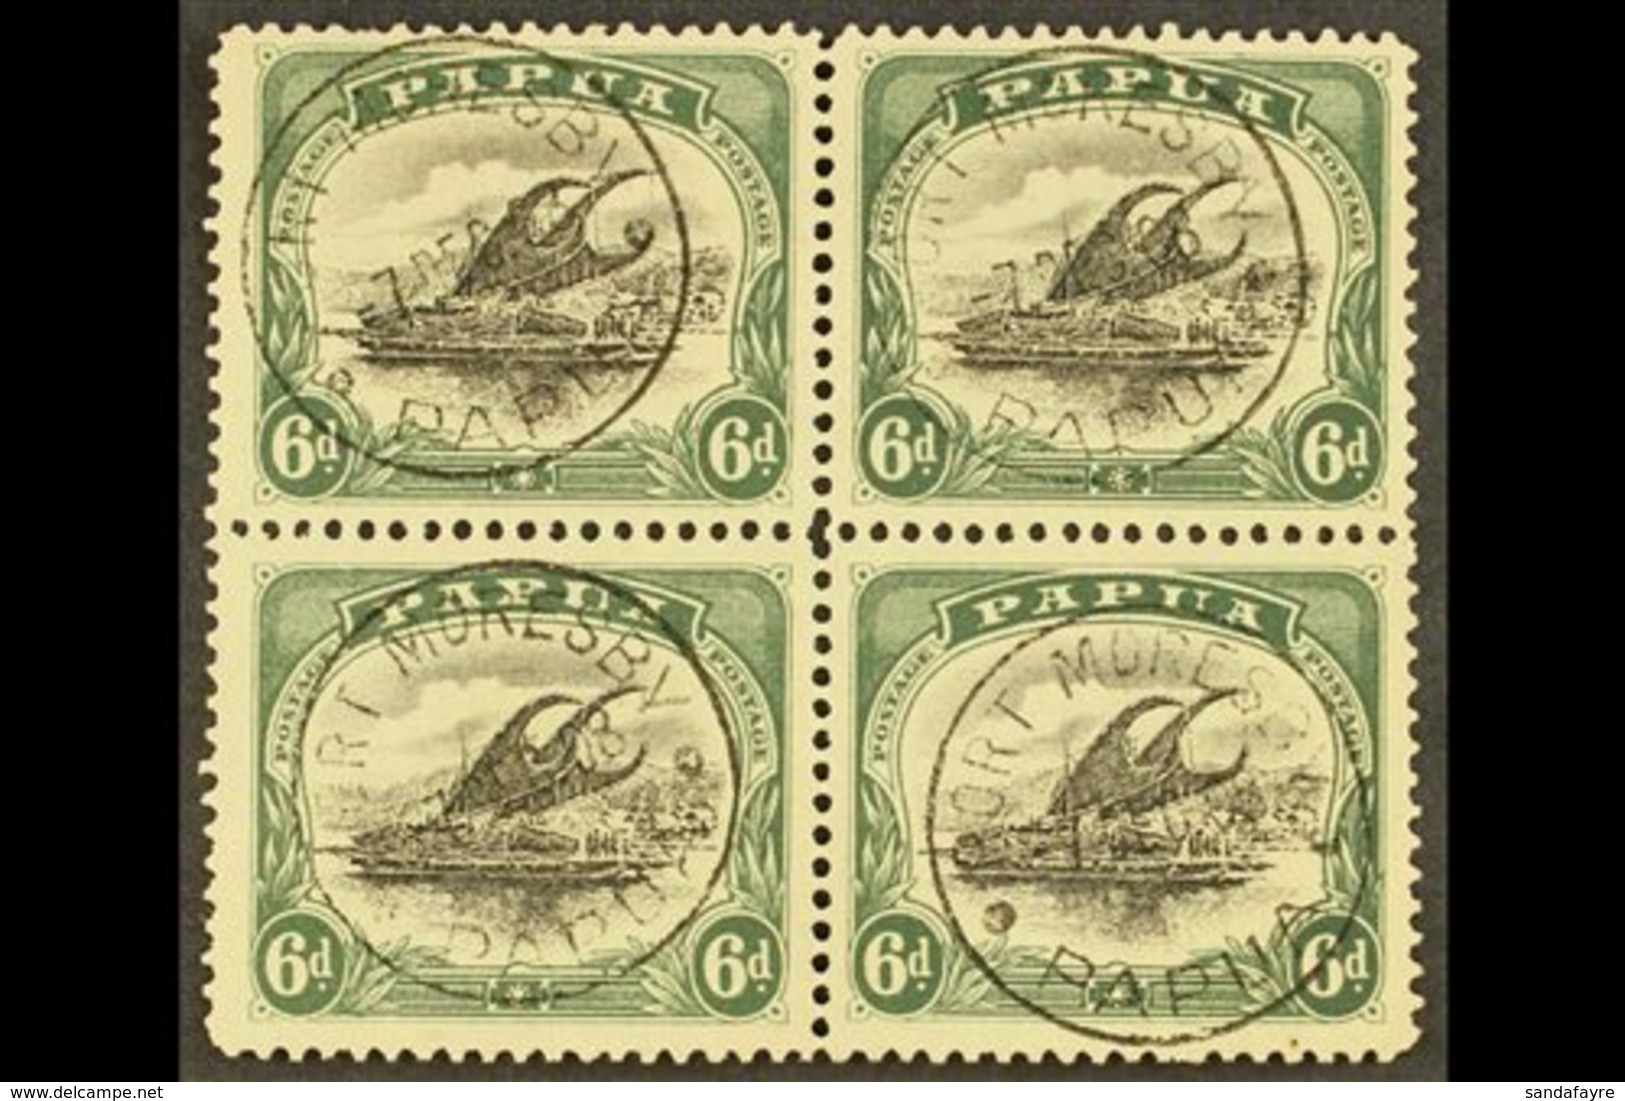 1907-98  Small Papua, Watermark Upright Perf 11 6d Black And Myrtle Green, SG 53, Superb Cds Used Block Of Four, Port Mo - Papua New Guinea